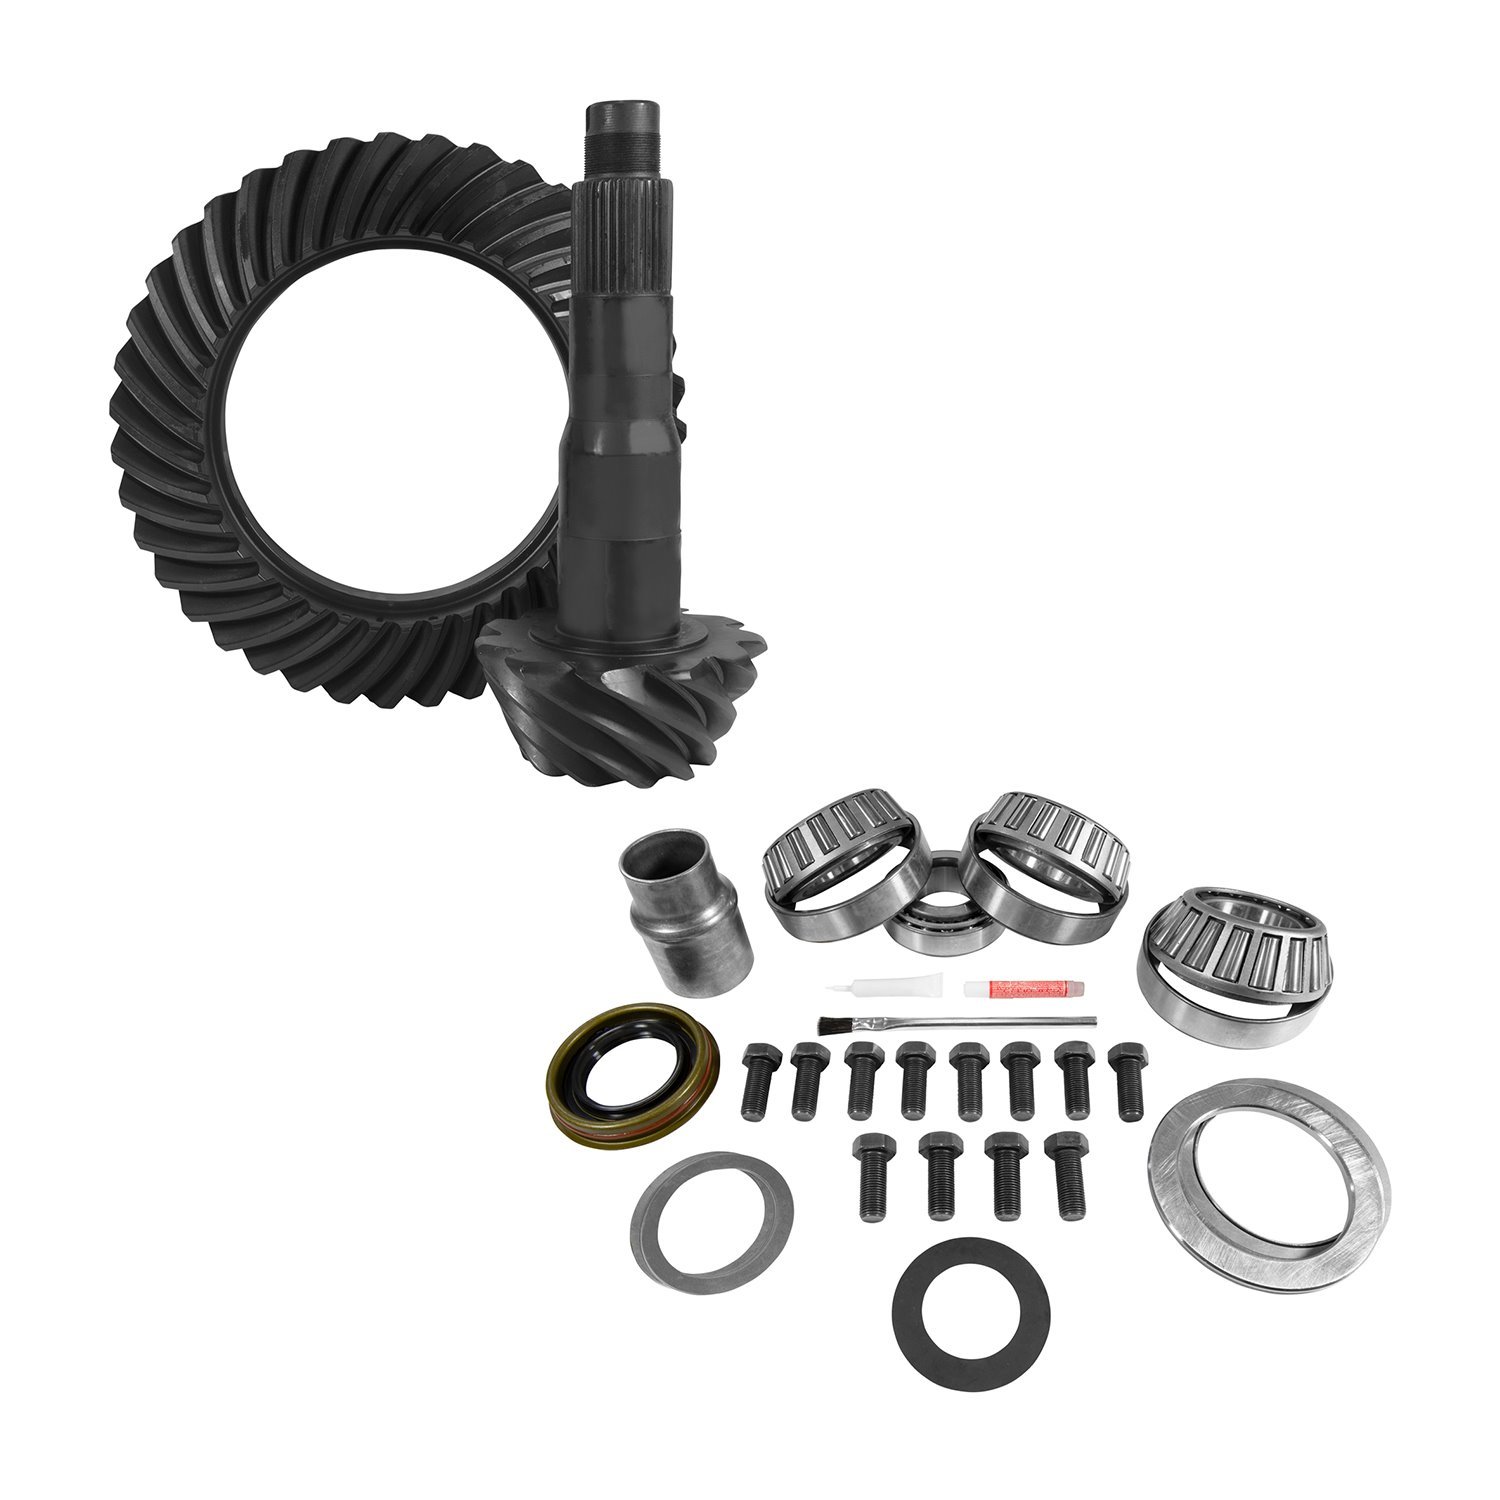 USA Standard 10863 10.5 in. Ford 4.56 Rear Ring & Pinion And Install Kit